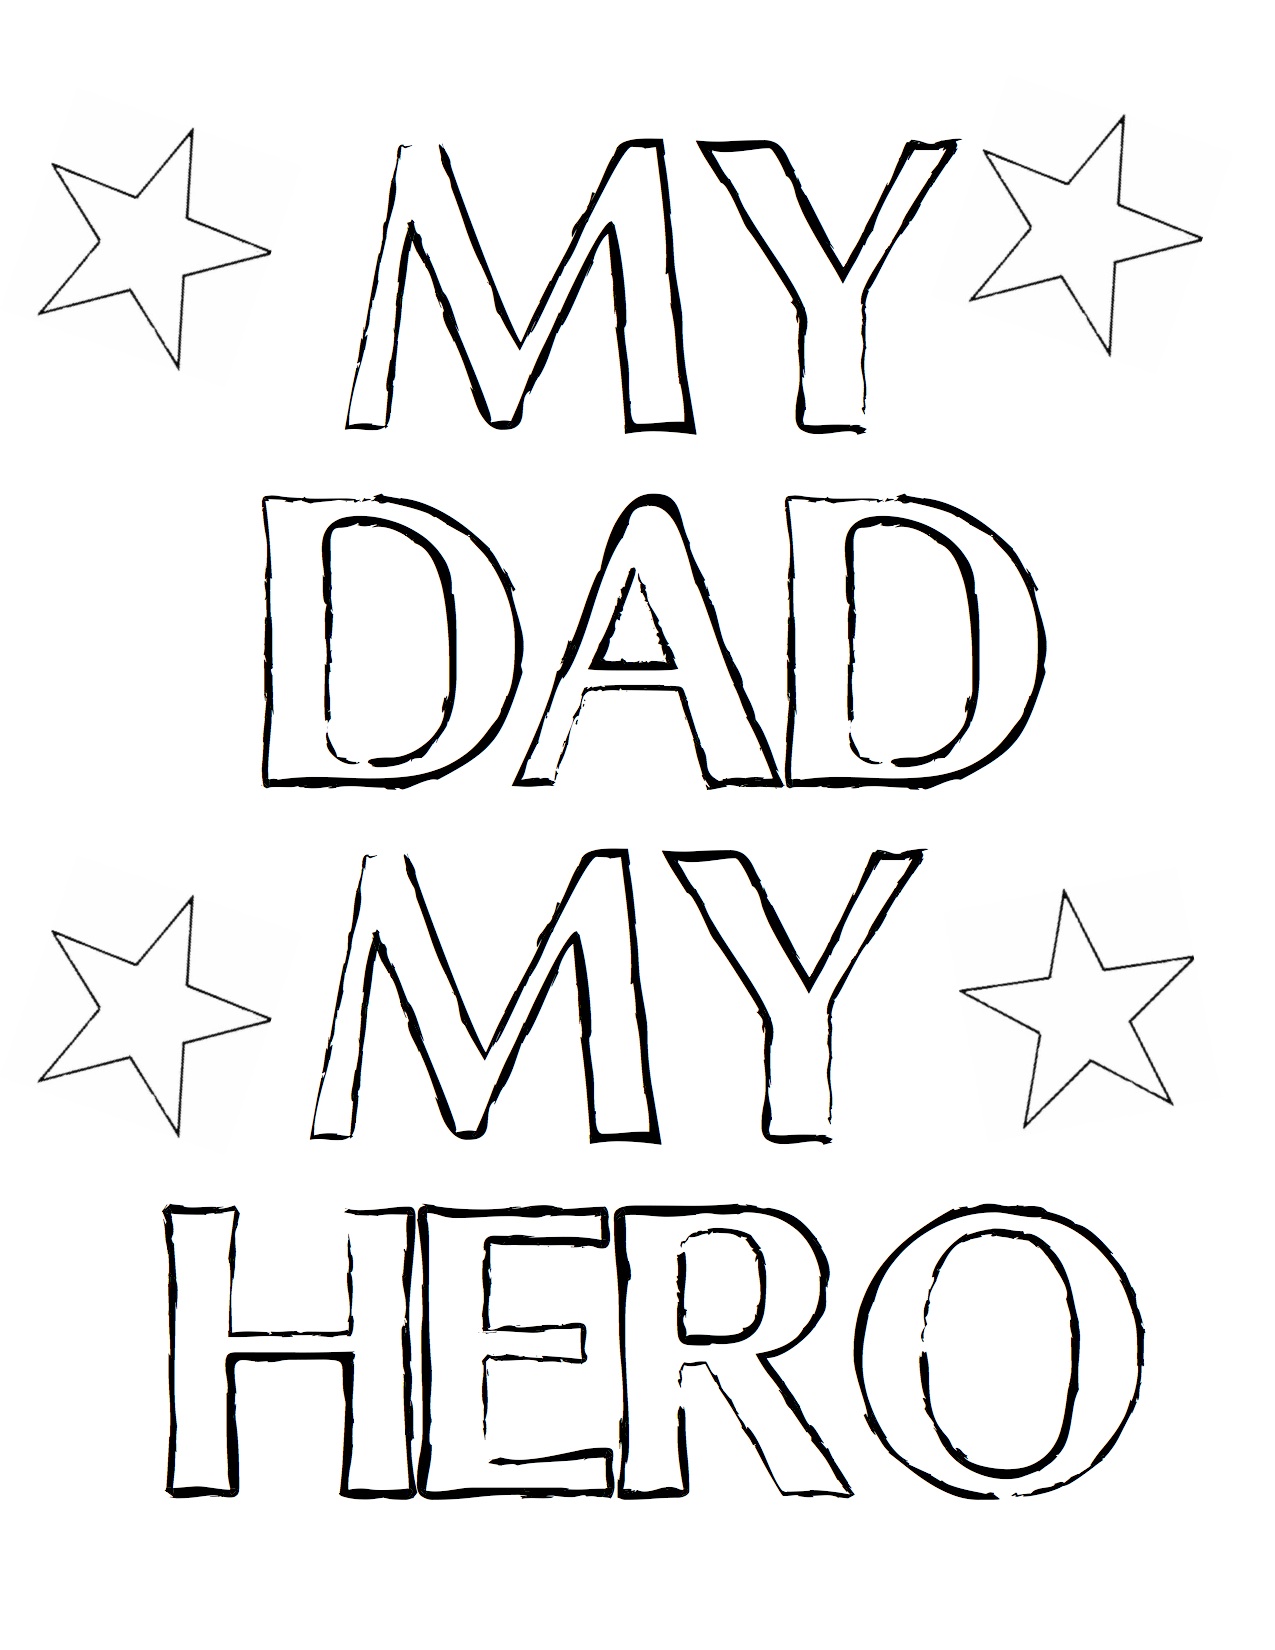 Free Fathers Day Printables And MORE The DIY Village